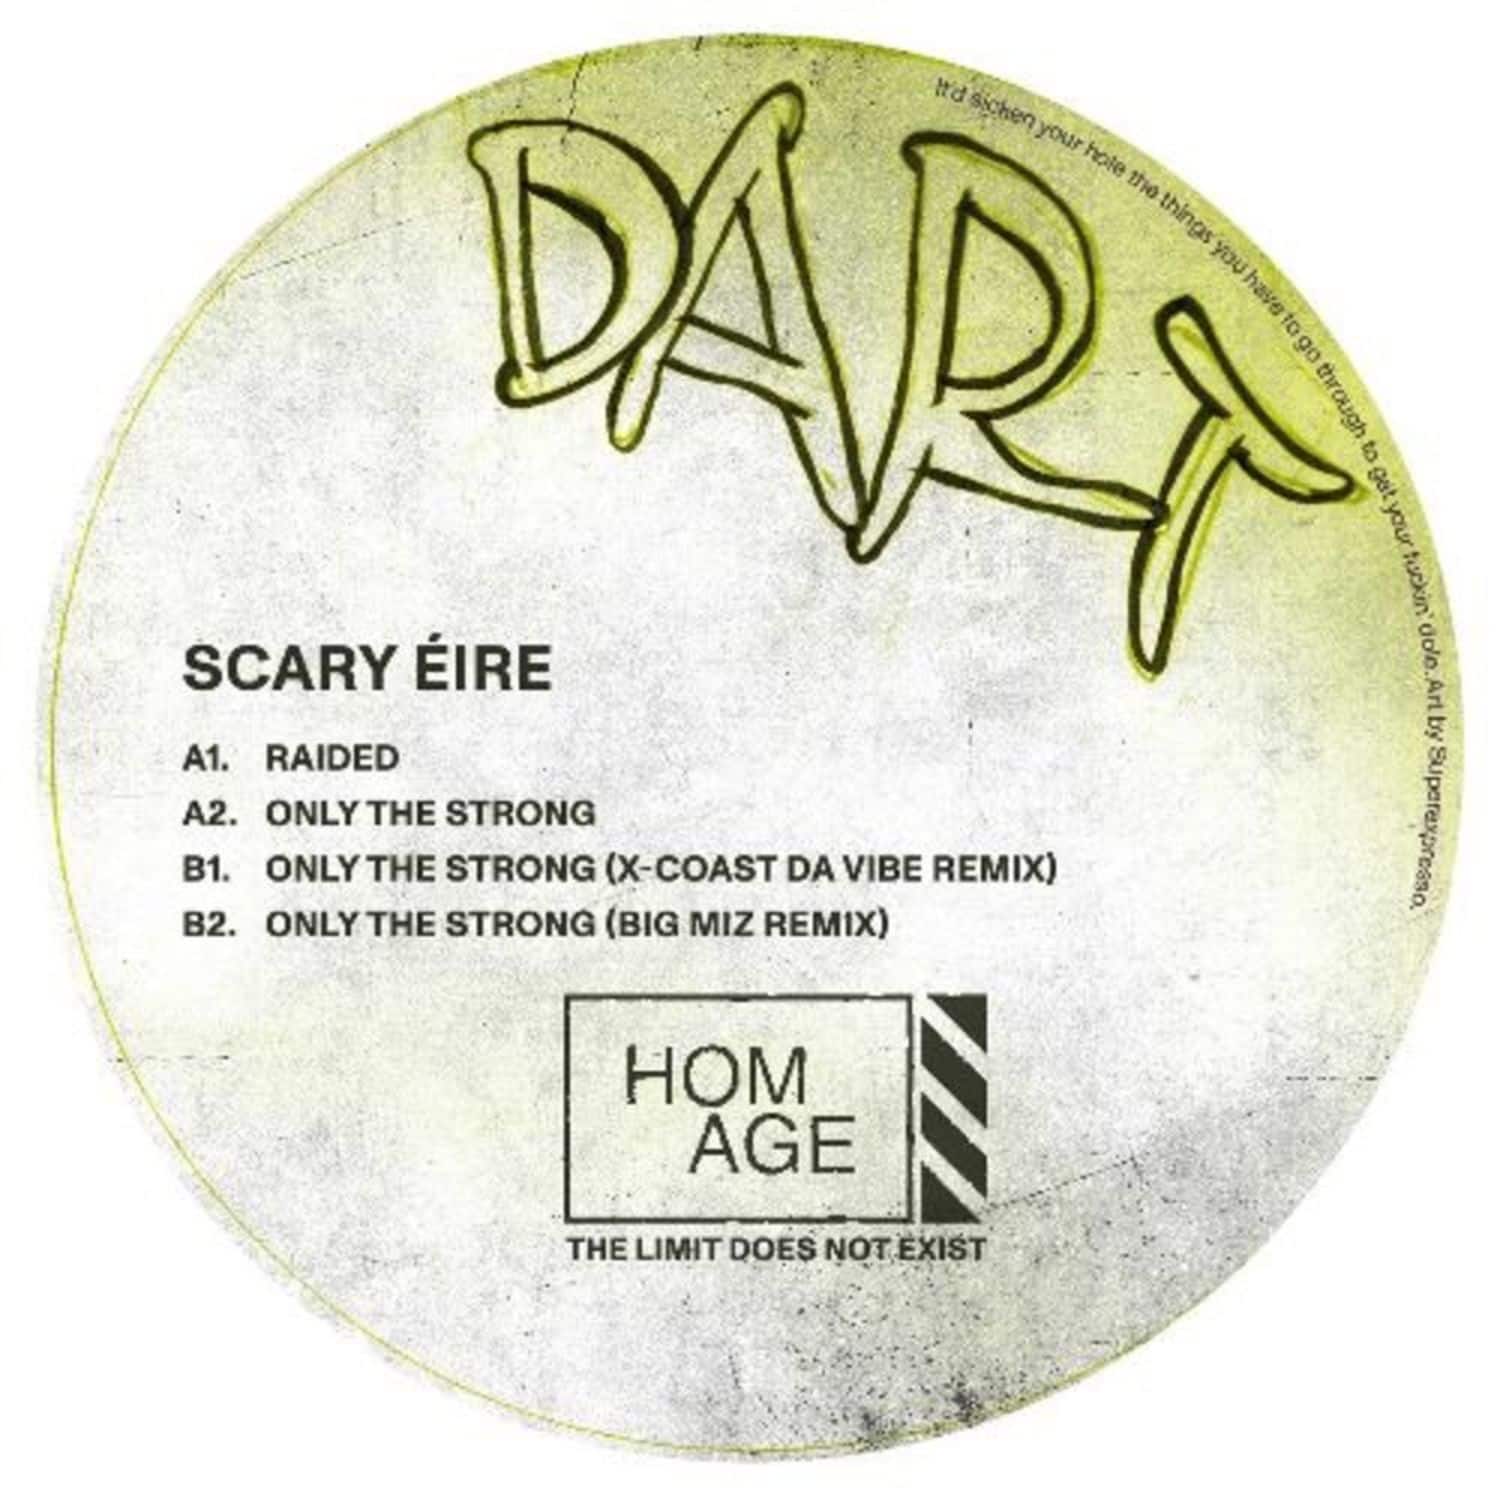 Dart - SCARY EIRE EP